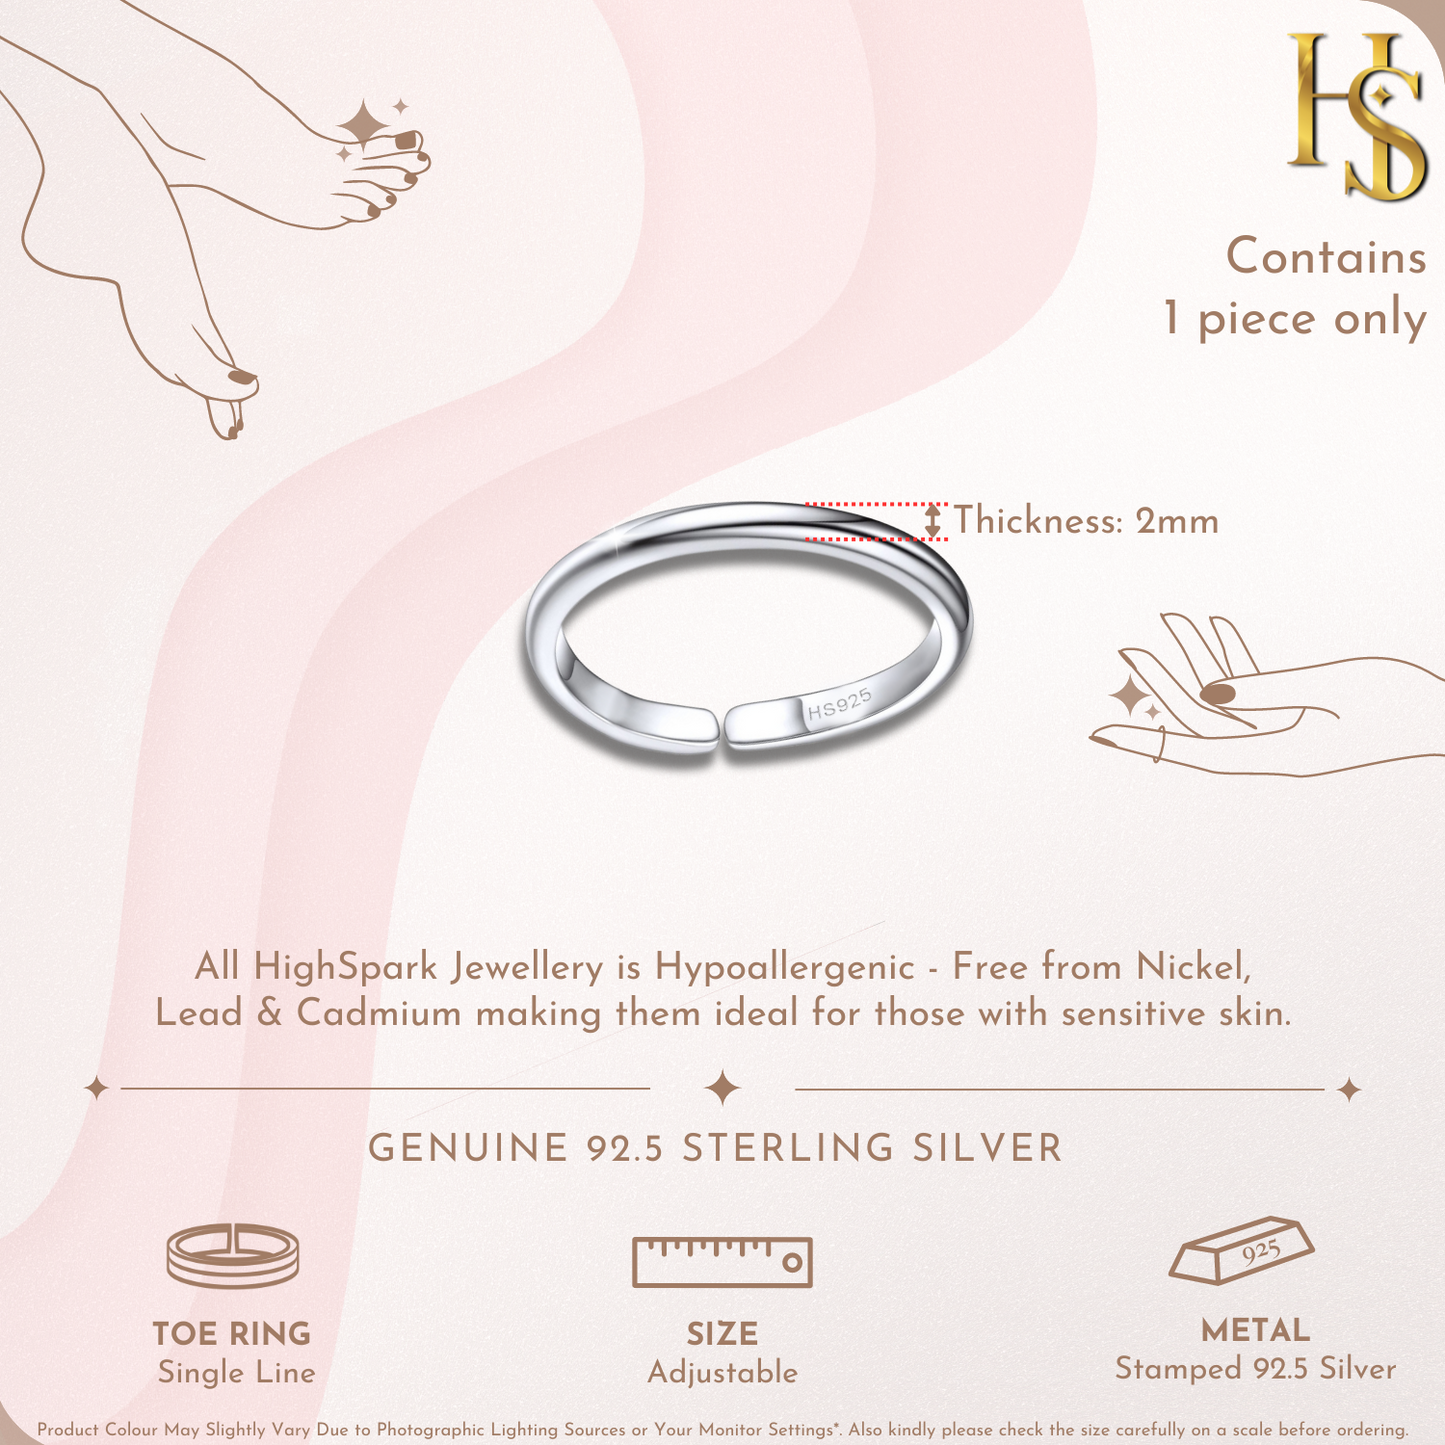 Classic Single Band Toe Ring - Band Ring - 925 Sterling Silver - 1 Piece